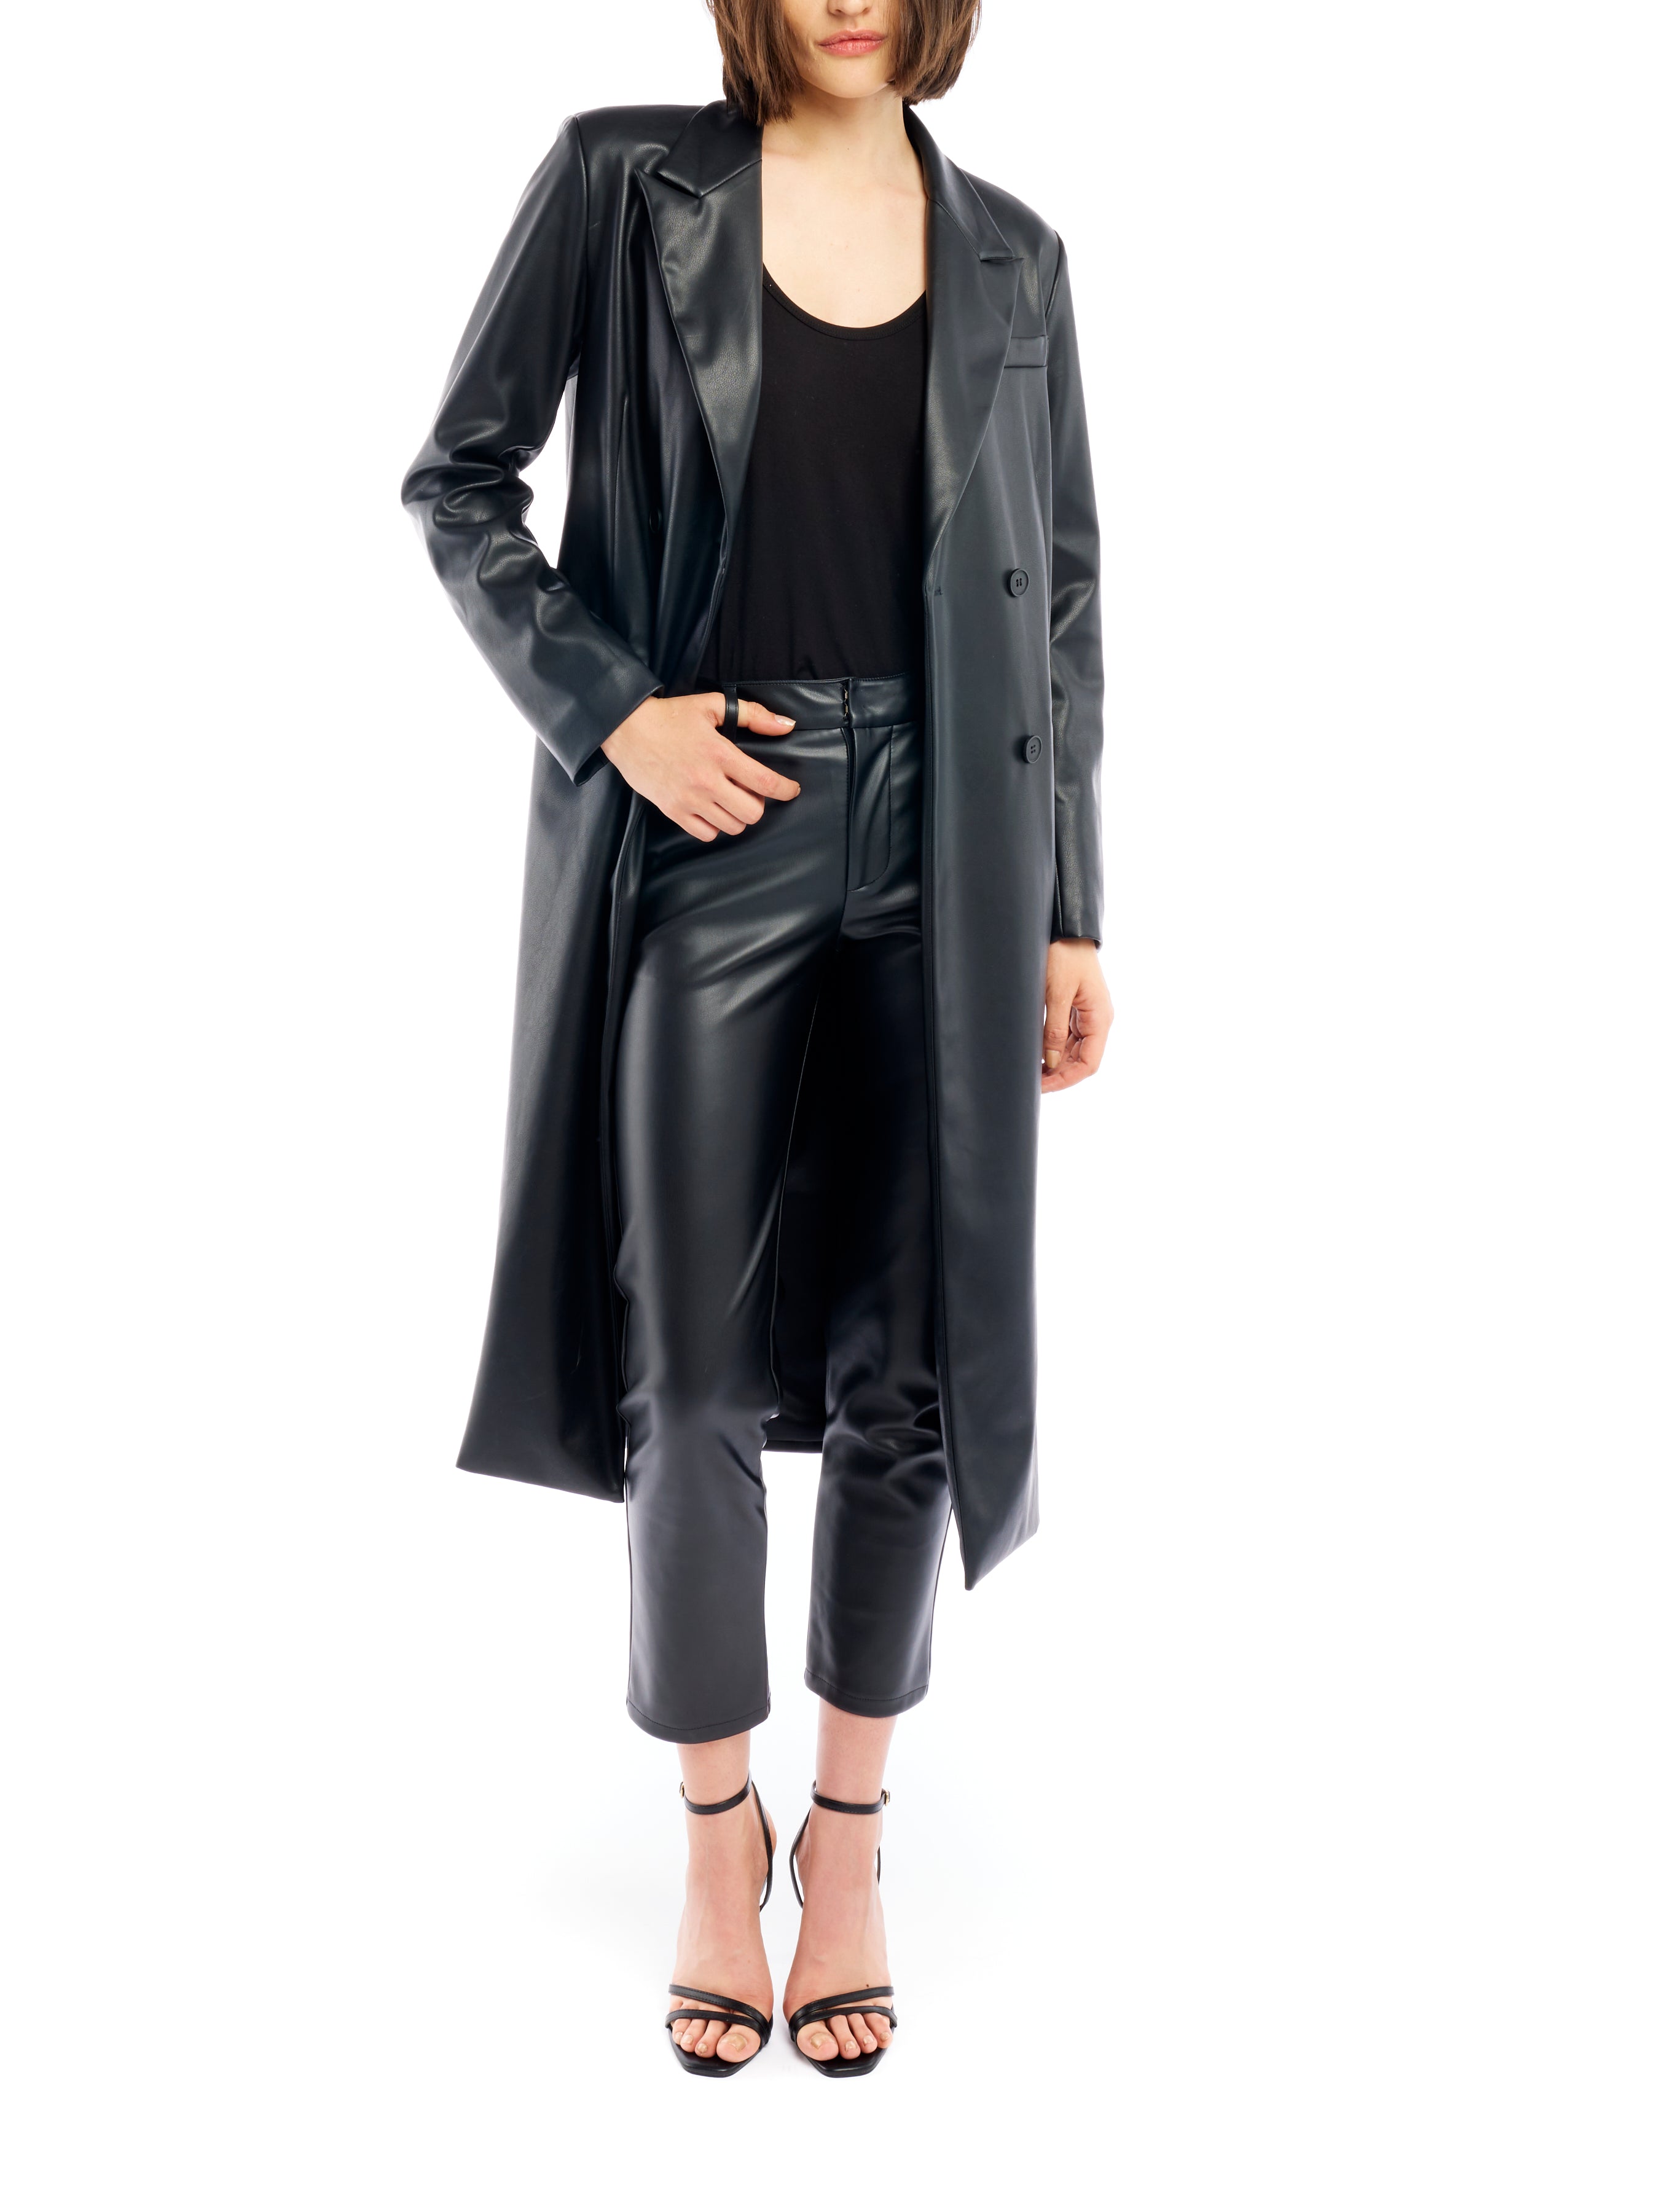 Midi length, double breasted, vegan leather jacket featuring long sleeves and pockets